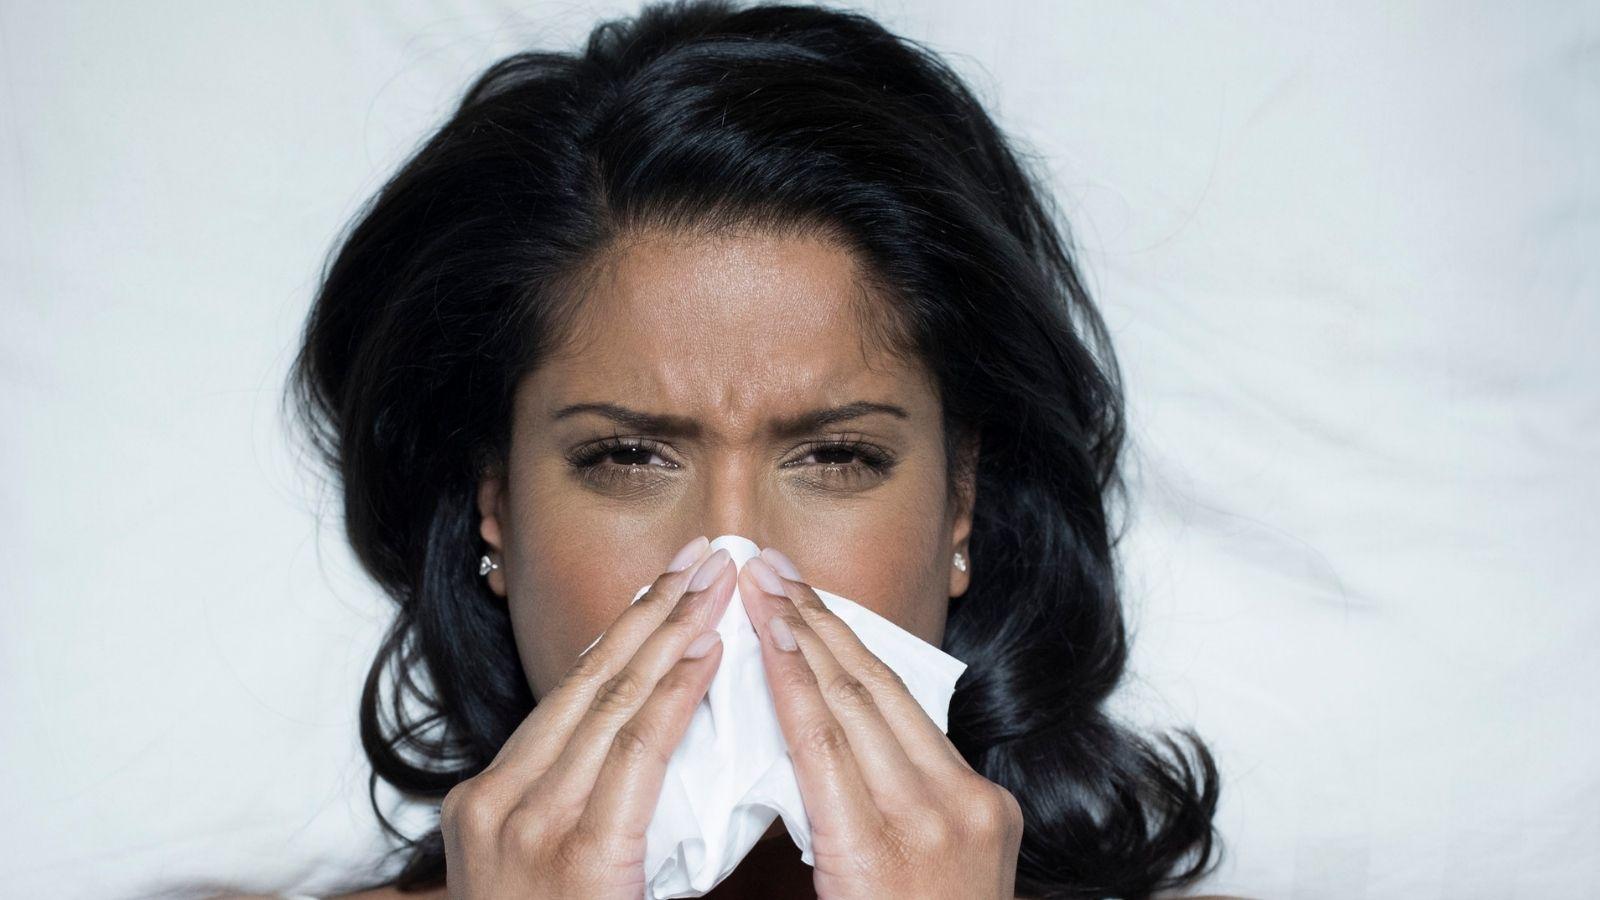 image of woman with dark shoulder length hair sneezing into a white tissue